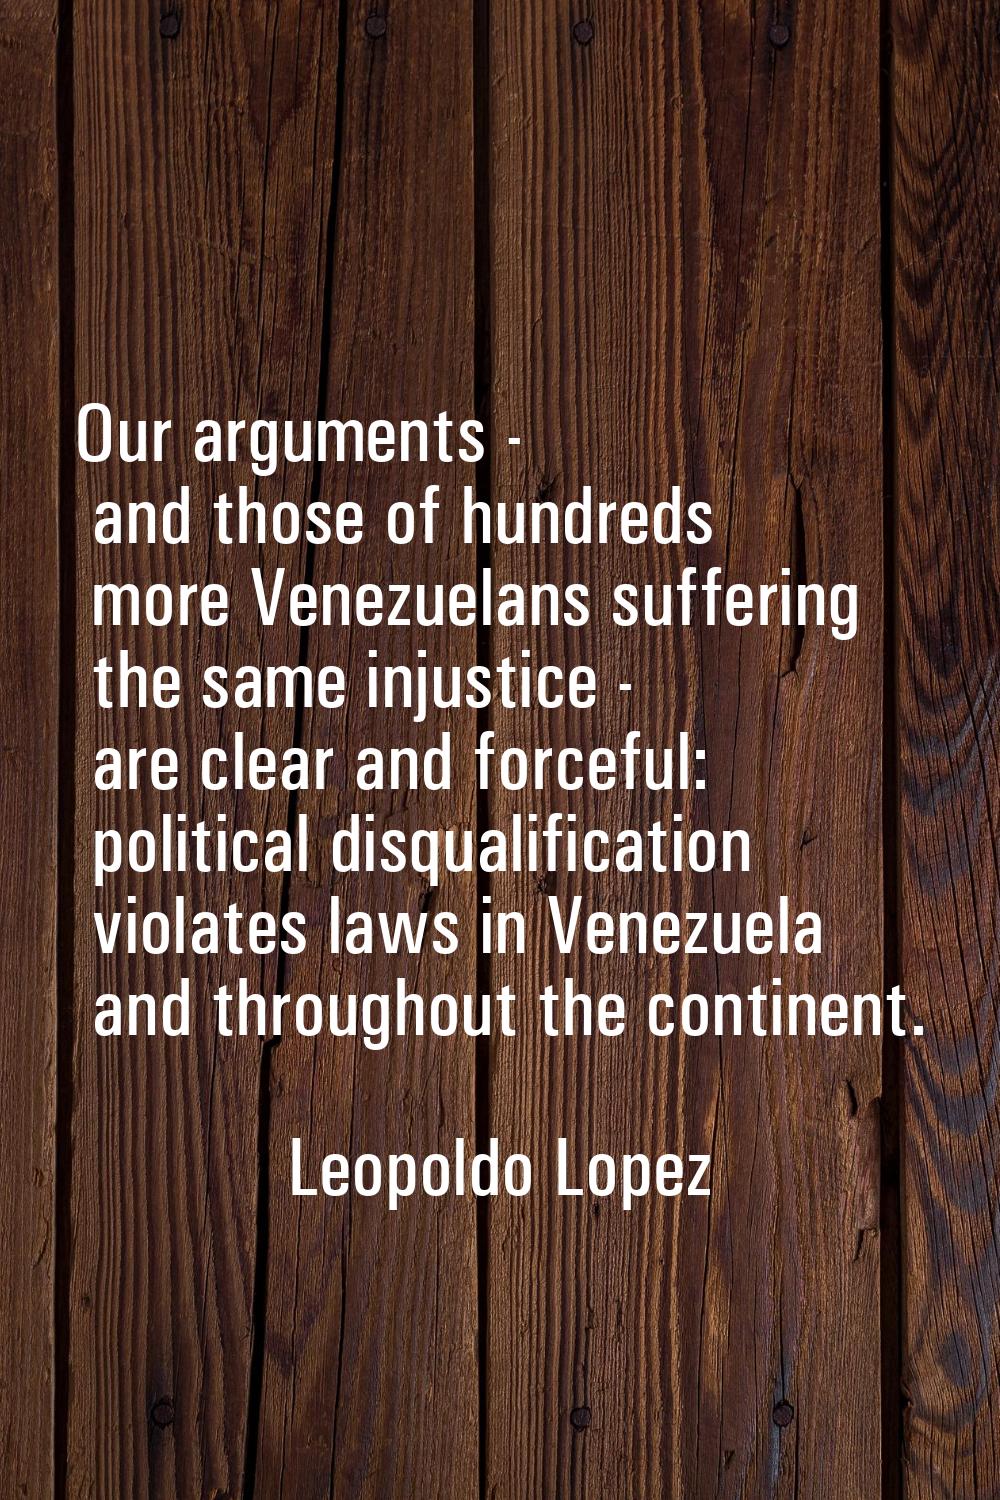 Our arguments - and those of hundreds more Venezuelans suffering the same injustice - are clear and